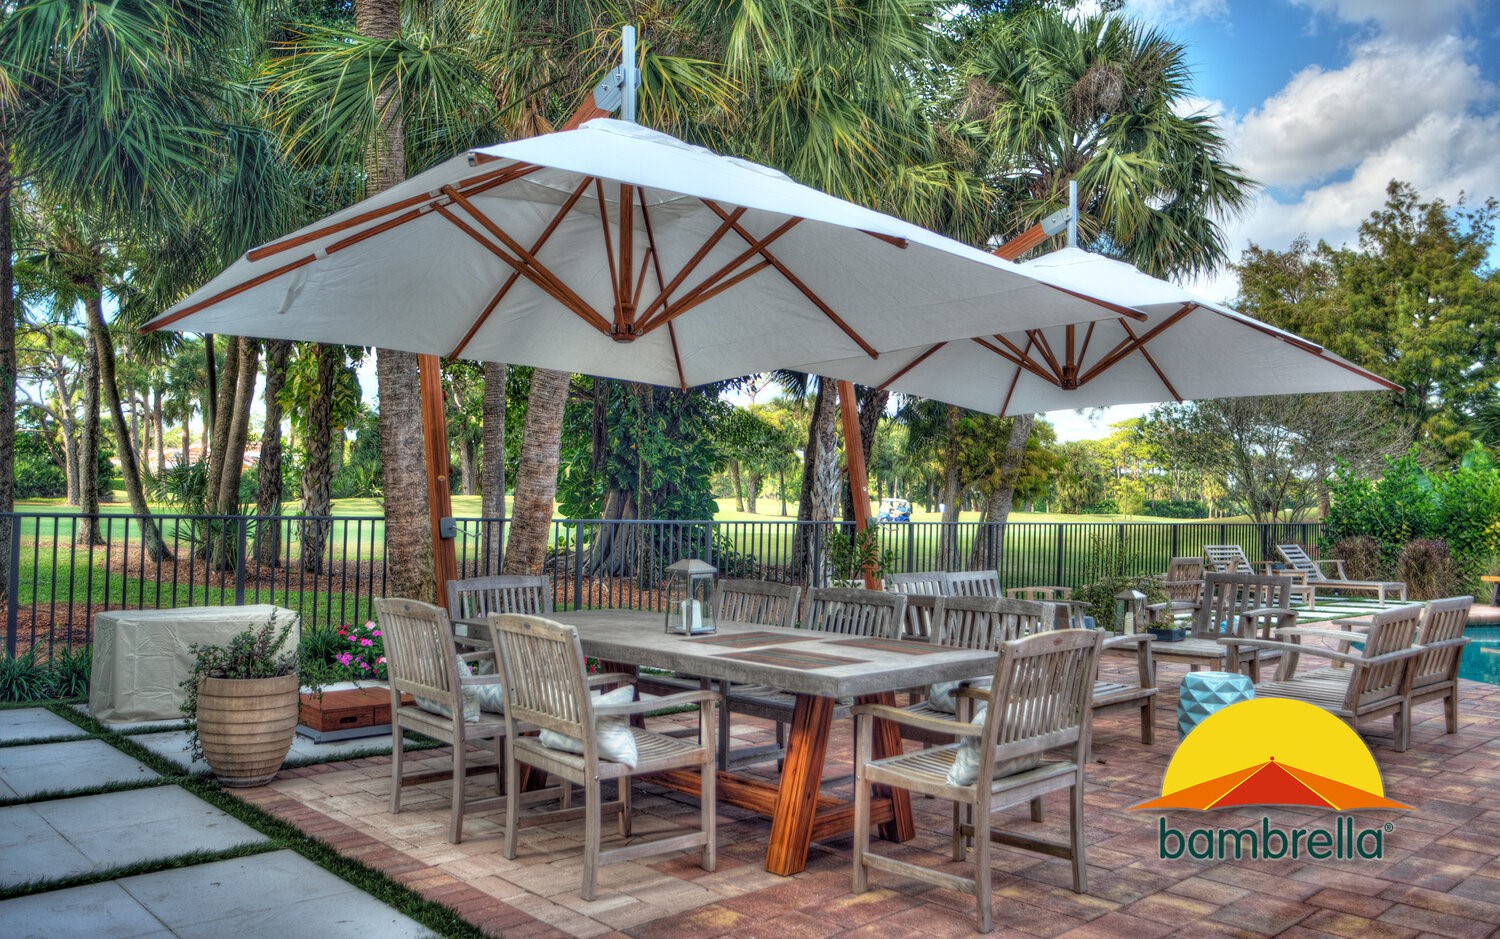 The Best 6 Patio Umbrellas For Tables, What Size Umbrella To Get For Patio Table